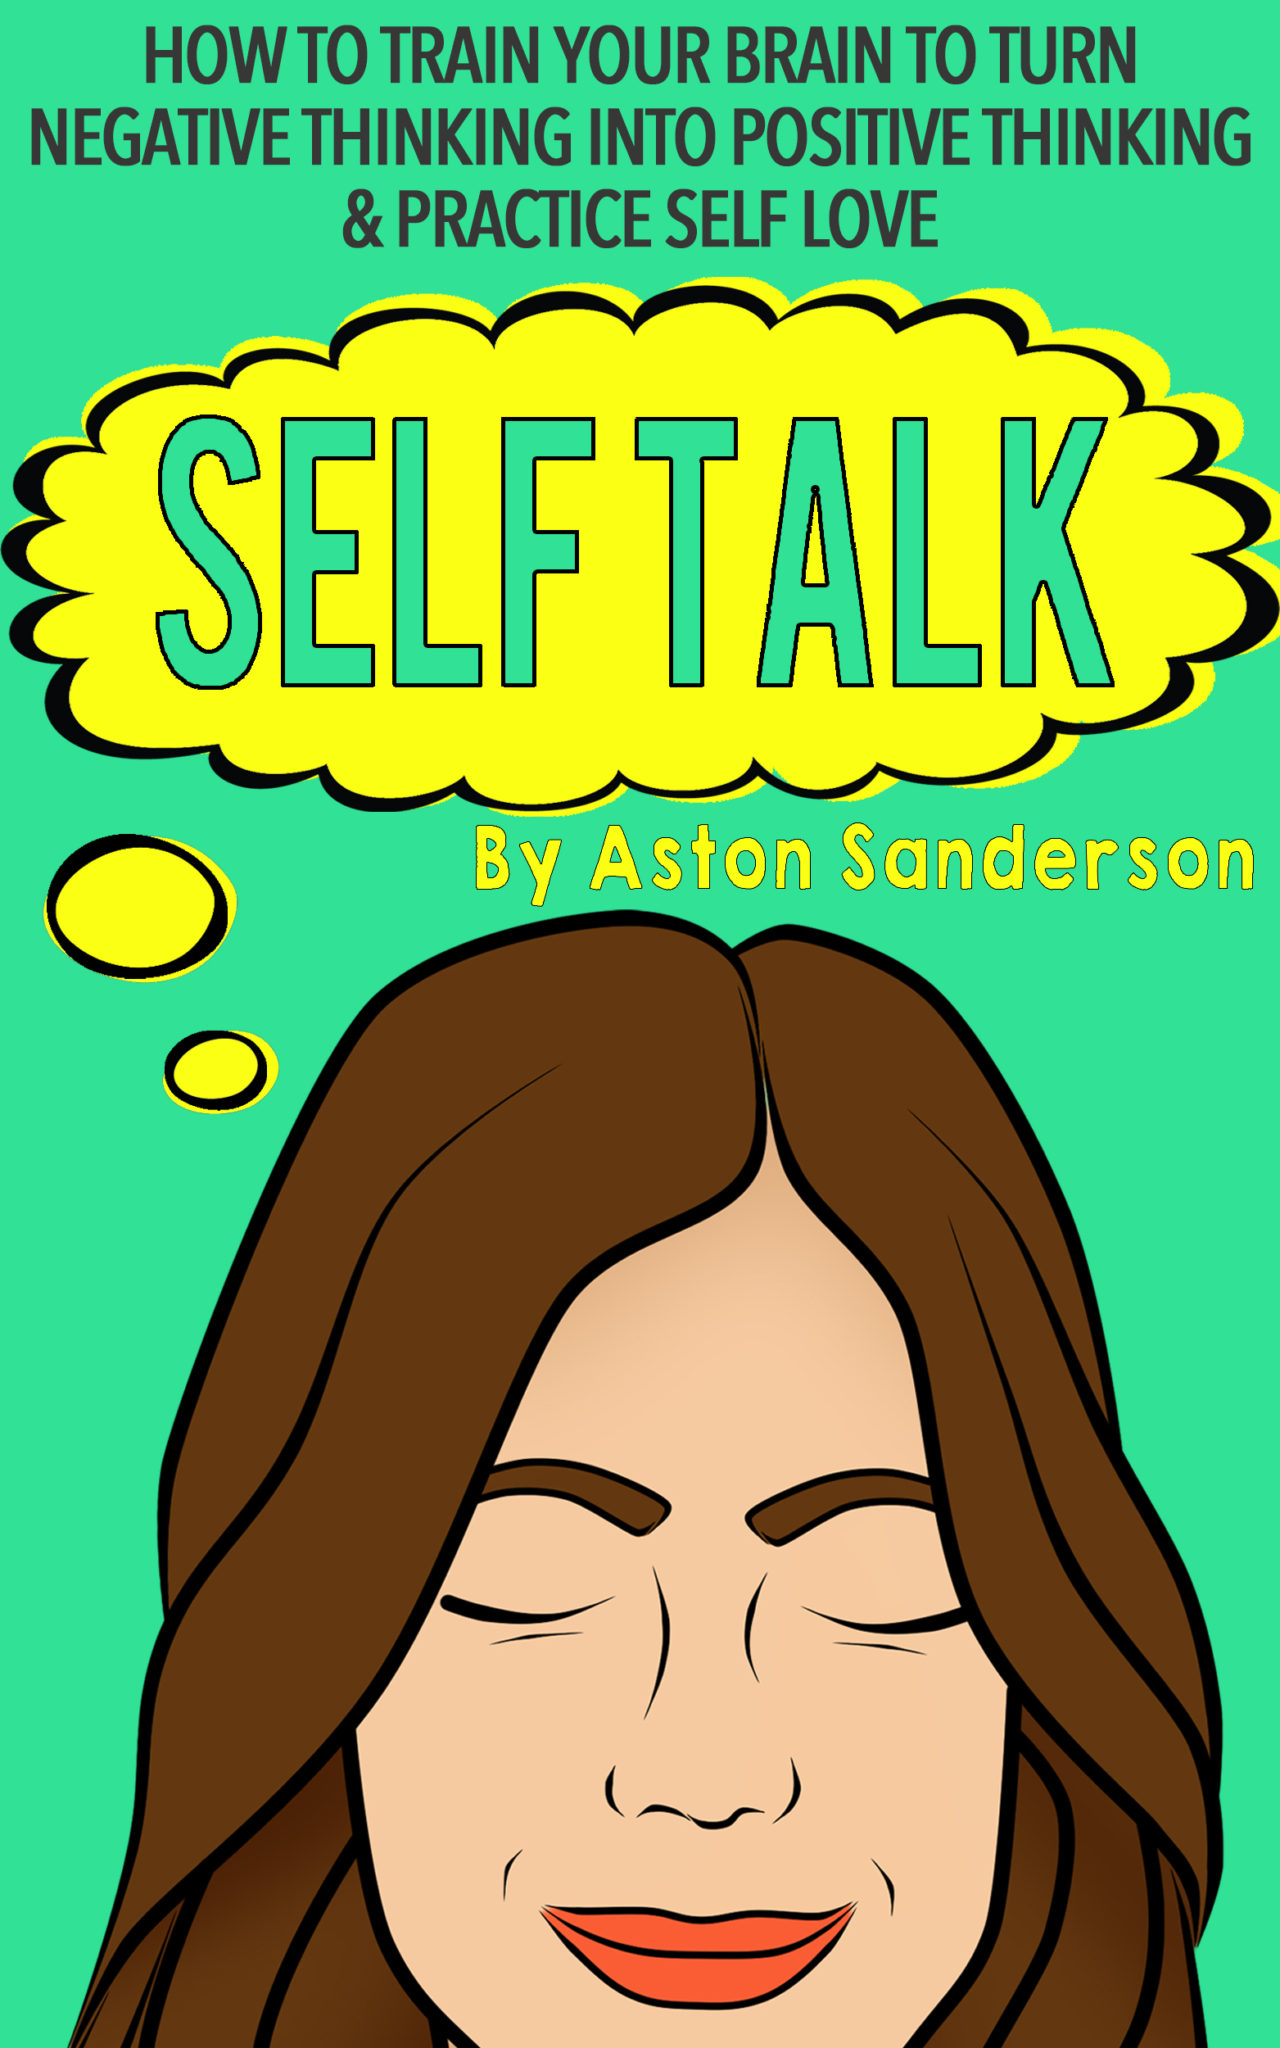 FREE: Self Talk: How to Train Your Brain to Turn Negative Thinking into Positive Thinking & Practice Self Love by Aston Sanderson